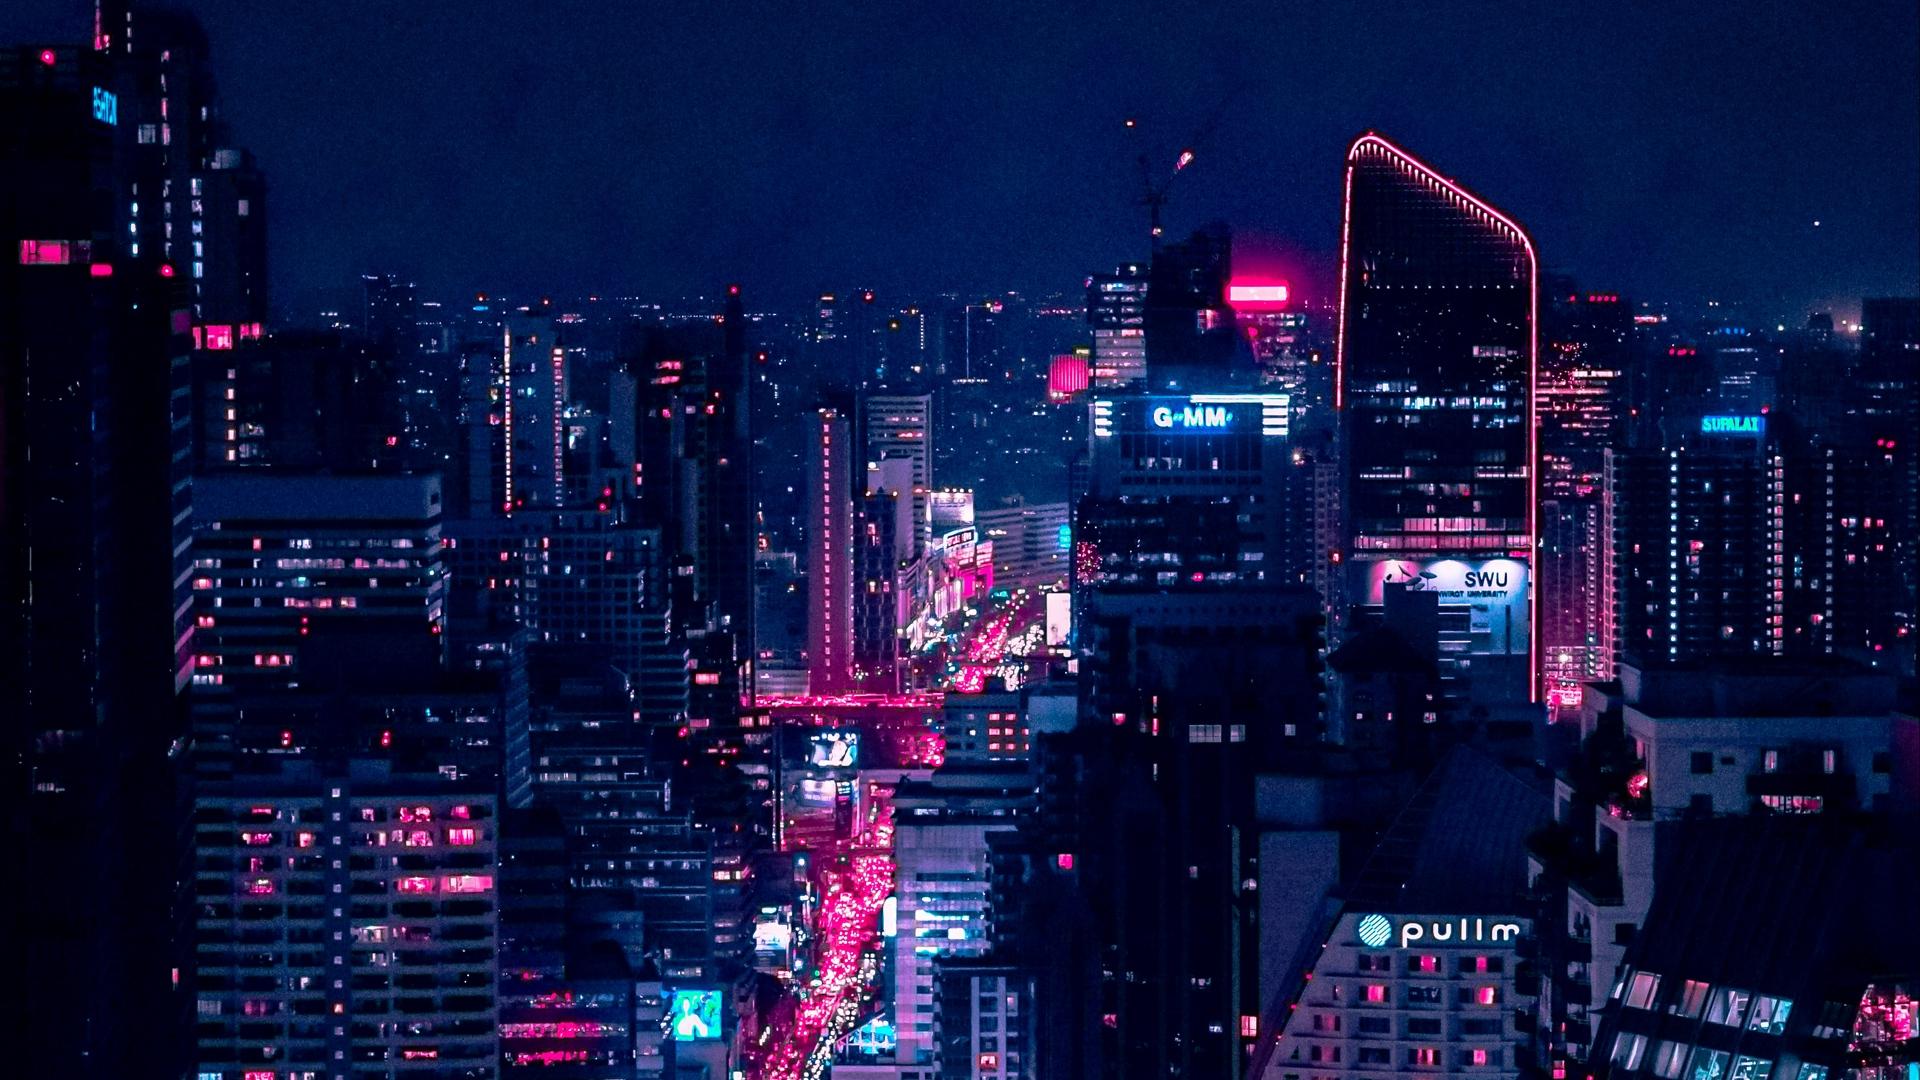 Download wallpaper 1920x1080 night city, city lights, aerial view